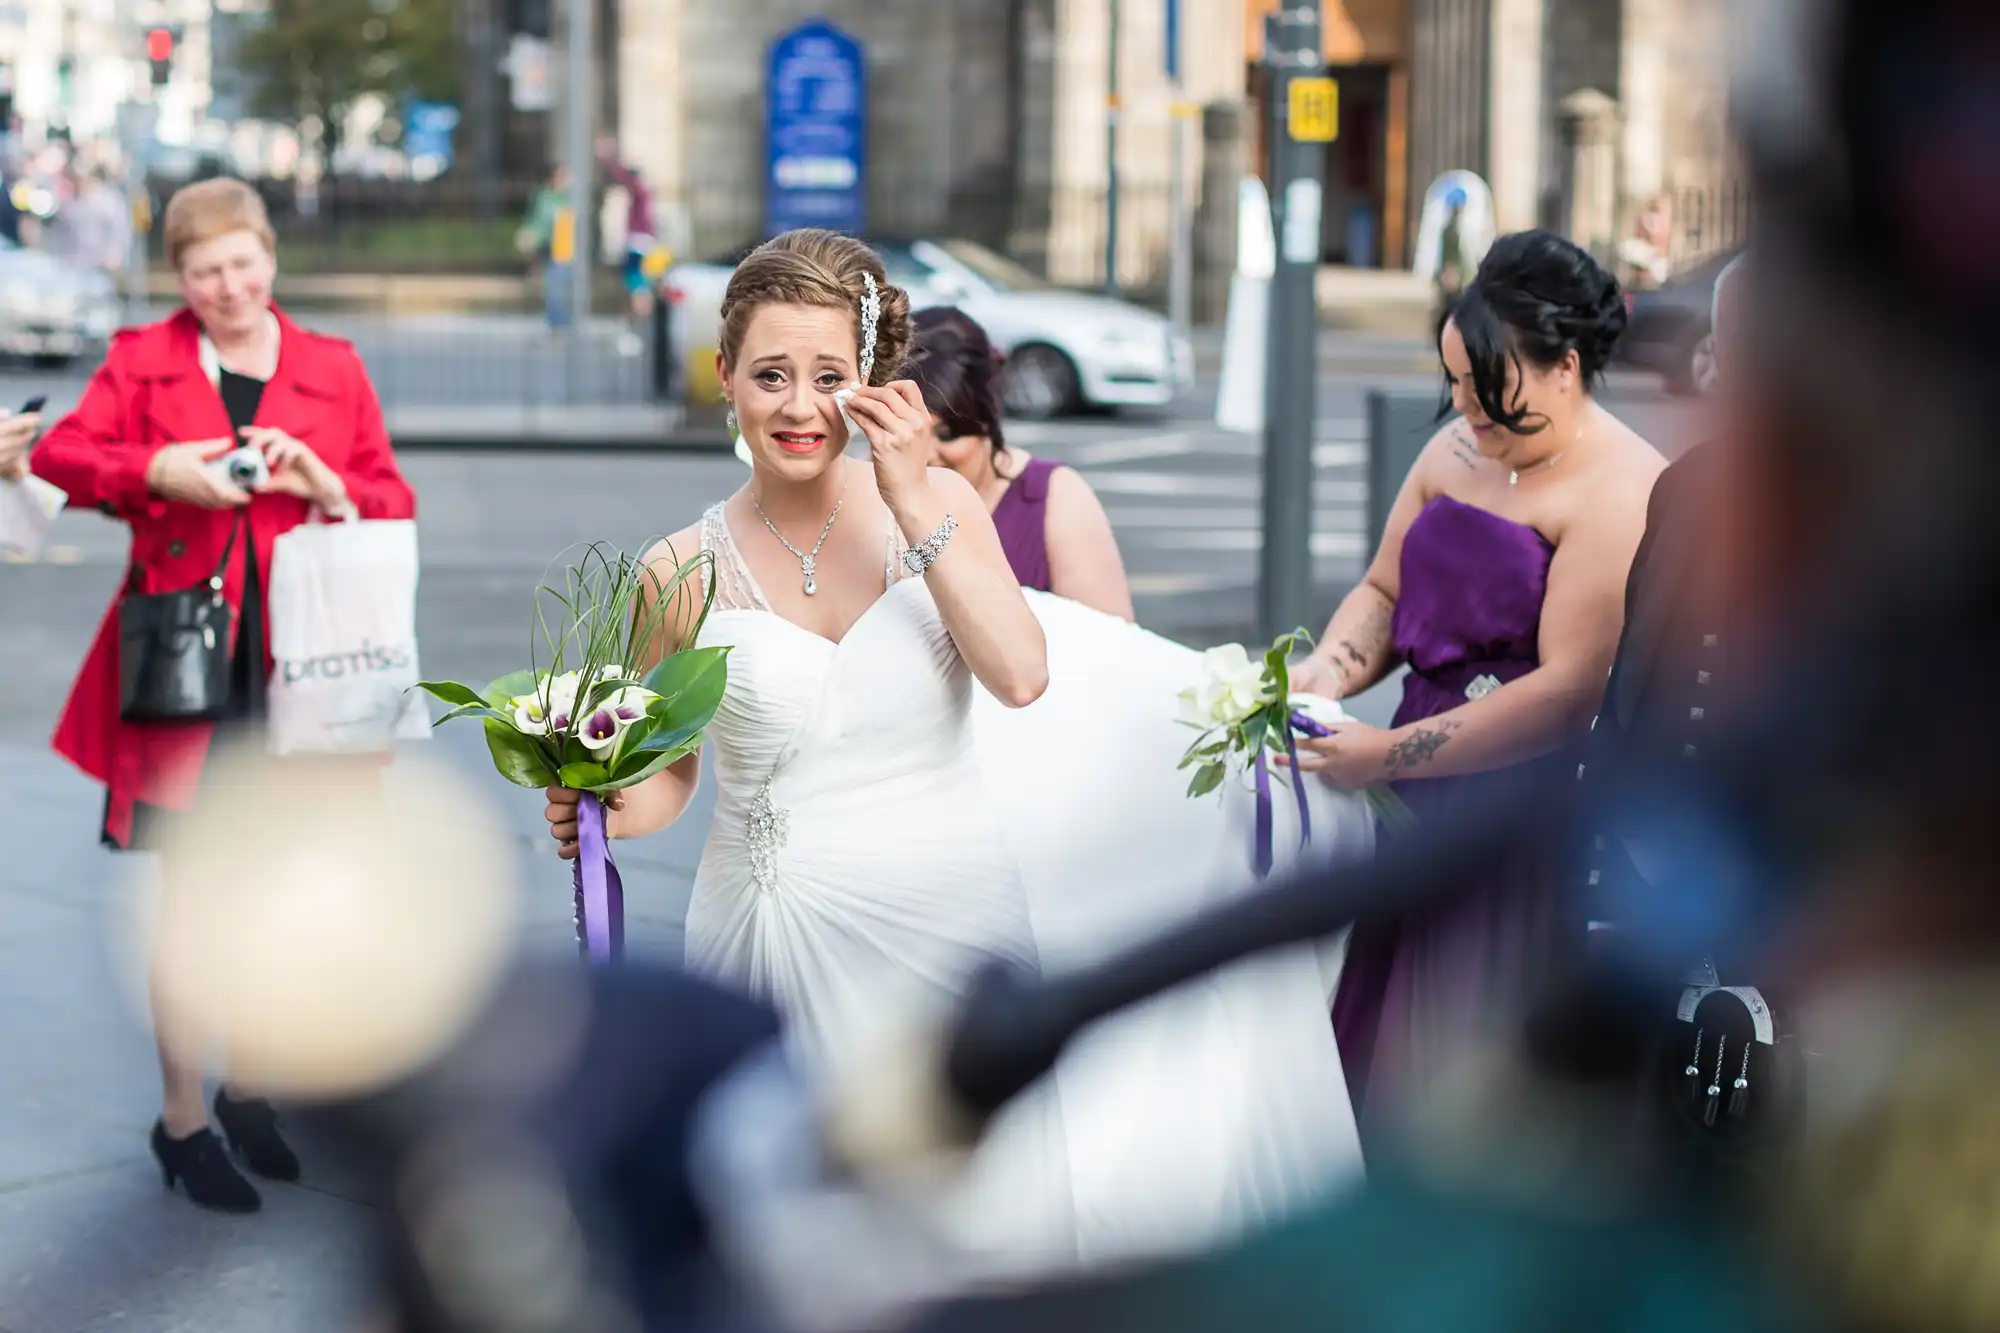 A bride holding a bouquet looks surprised on a busy city street, with guests in colorful attire and a photographer capturing the moment.